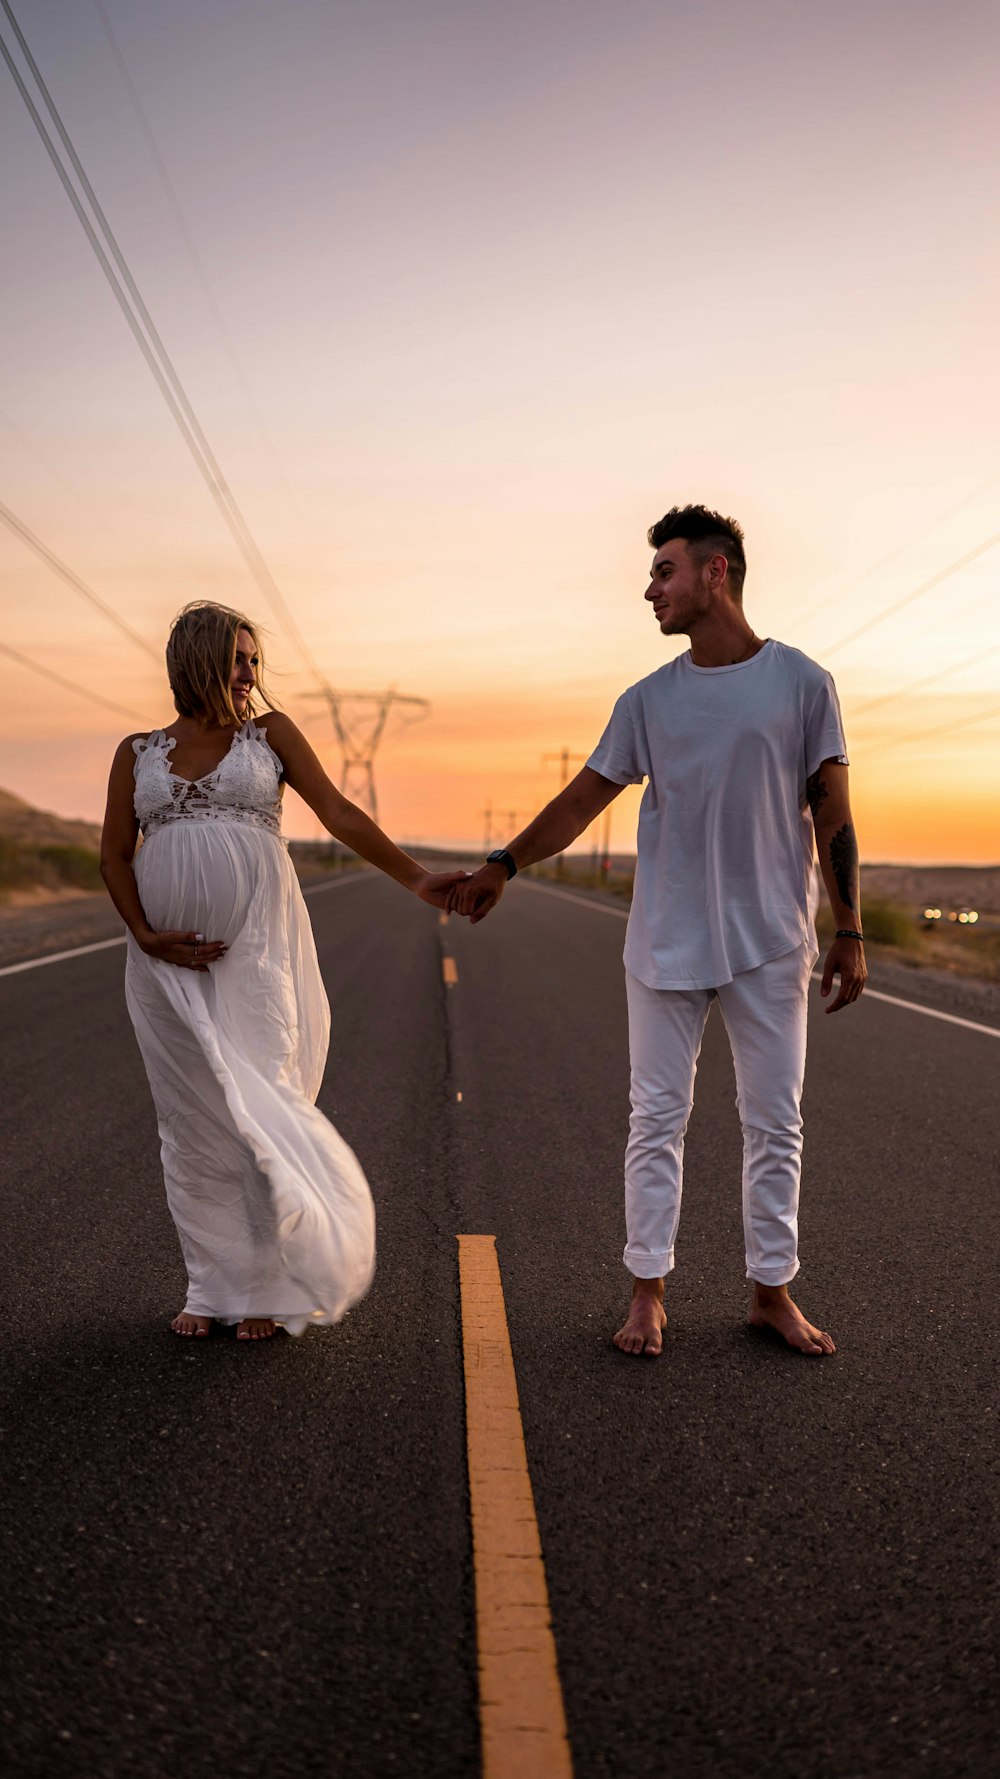 man and woman holding hands while walking on the road during sunset